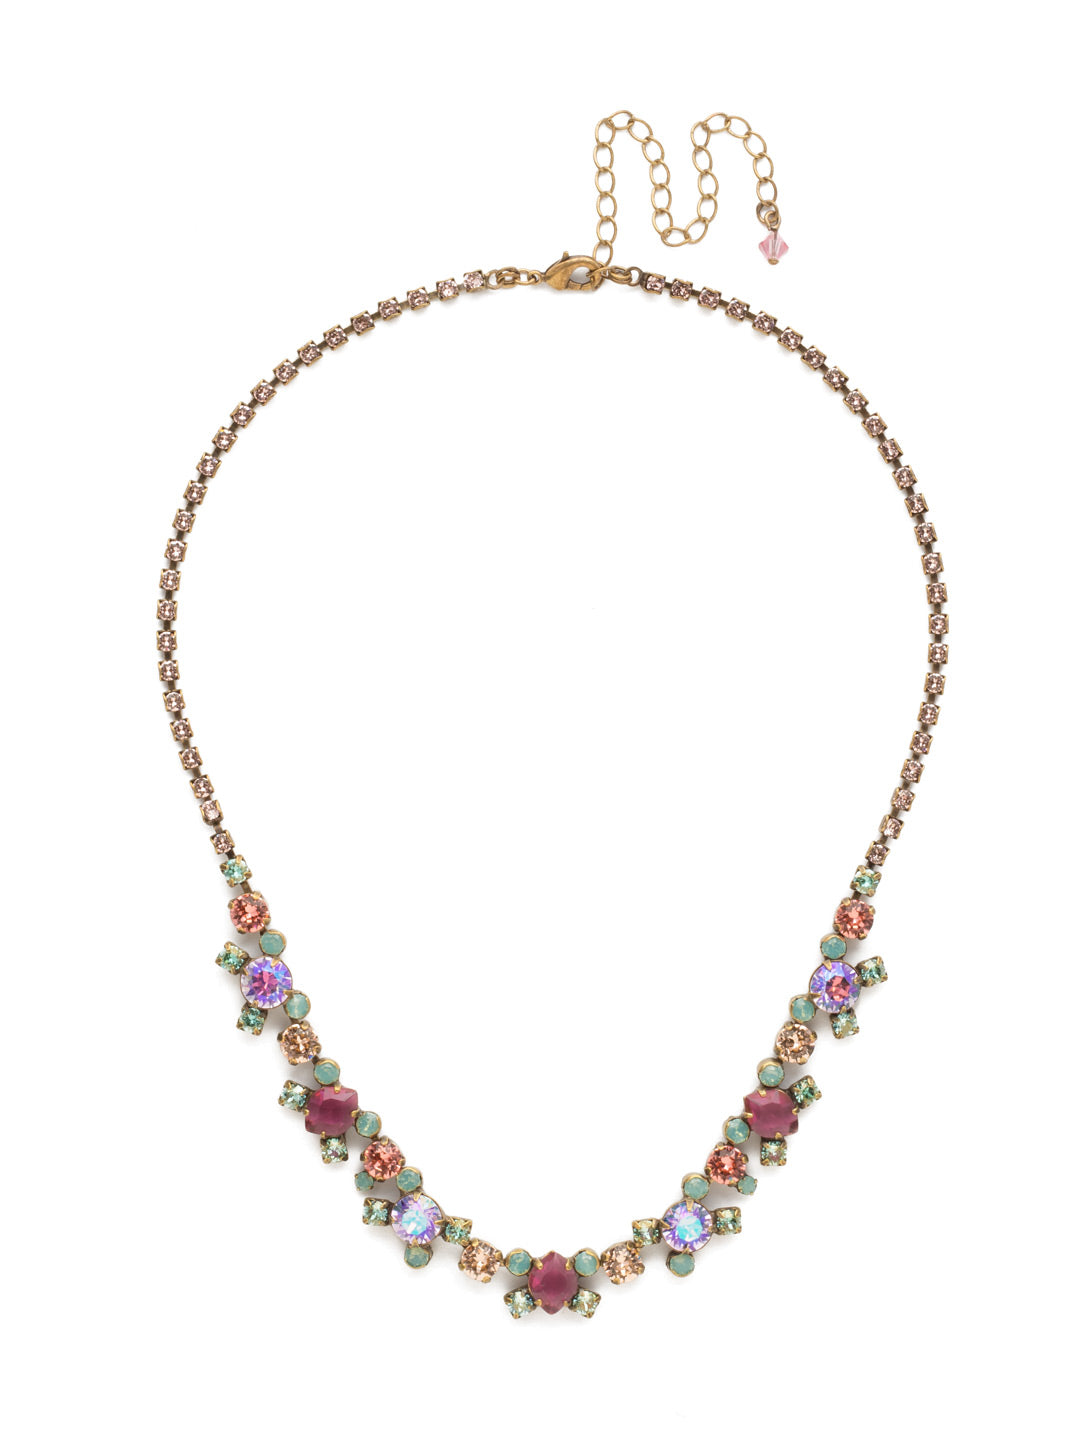 Perfect Harmony Line Tennis Necklace - NDK11AGRS - This classic line necklace features stations of crystal clusters alternating between round cut and pear shaped central stones, blending in perfect harmony! A rhinestone chain completes this design with all around sparkle. From Sorrelli's Radiant Sunrise collection in our Antique Gold-tone finish.